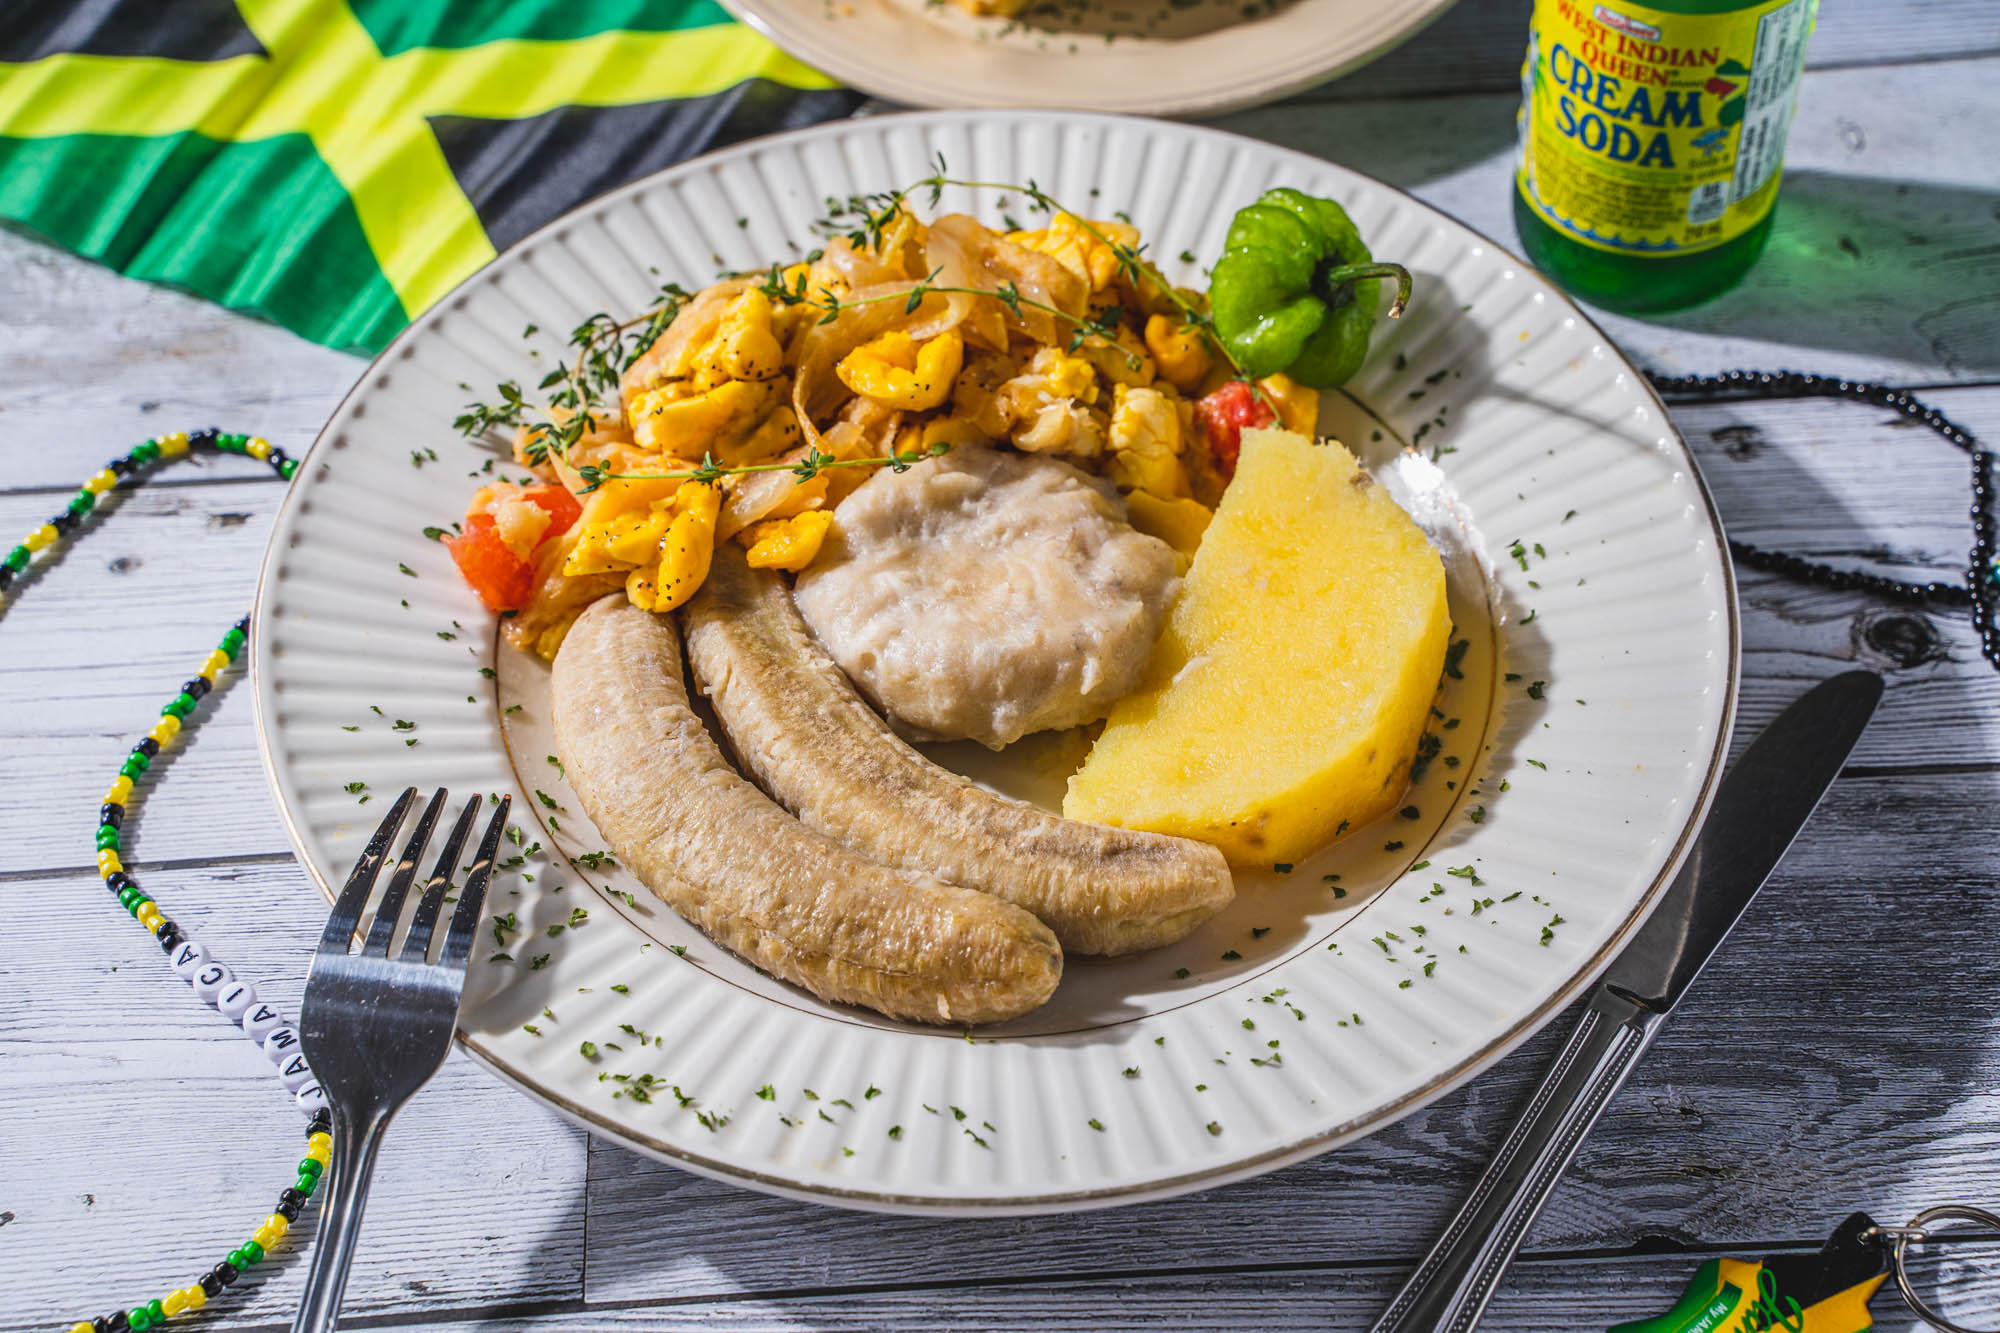 Saltfish, with bananas, pineapple and mixed vegetables